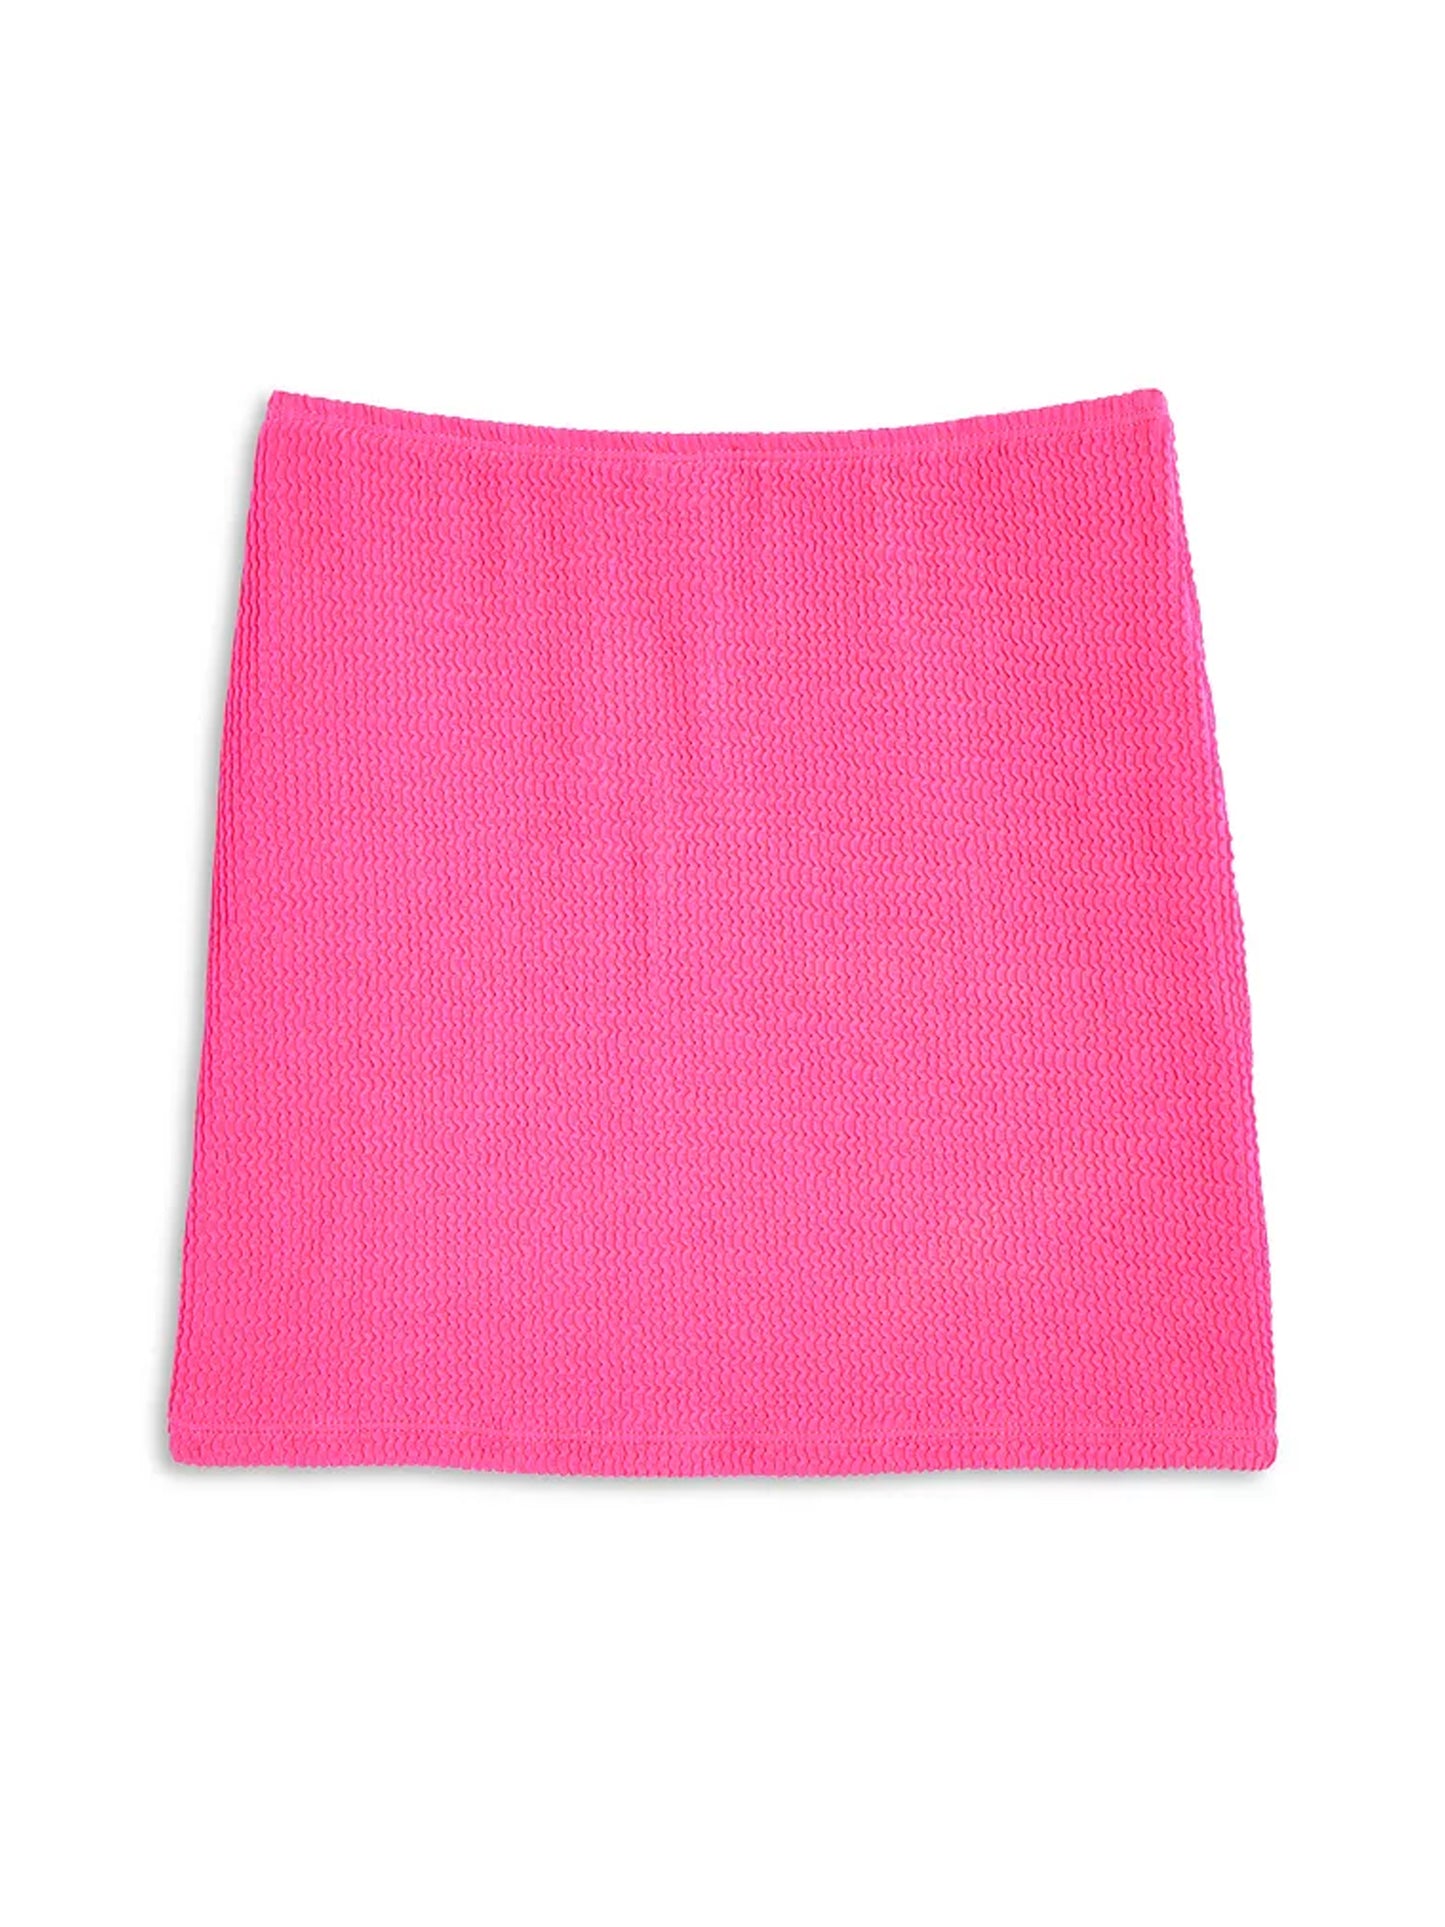 Girls Portia Short Skirt with Crinkle Texture Fabric